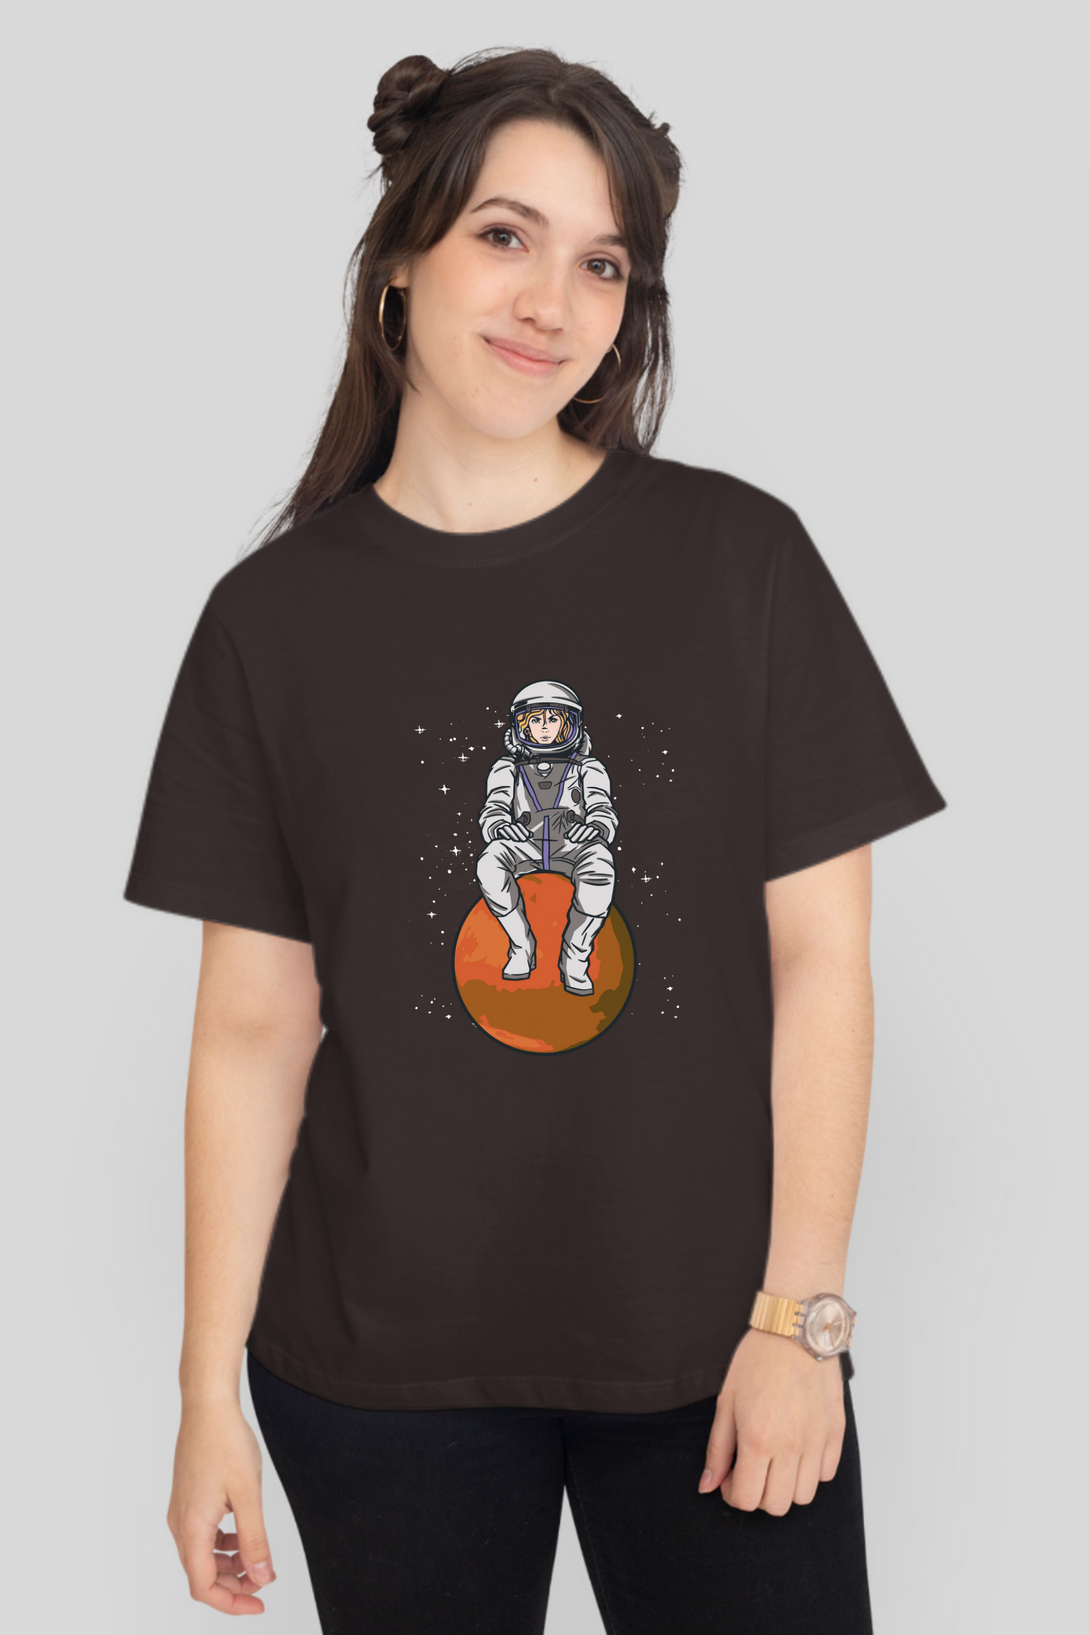 Space Explorer Printed T-Shirt For Women - WowWaves - 7